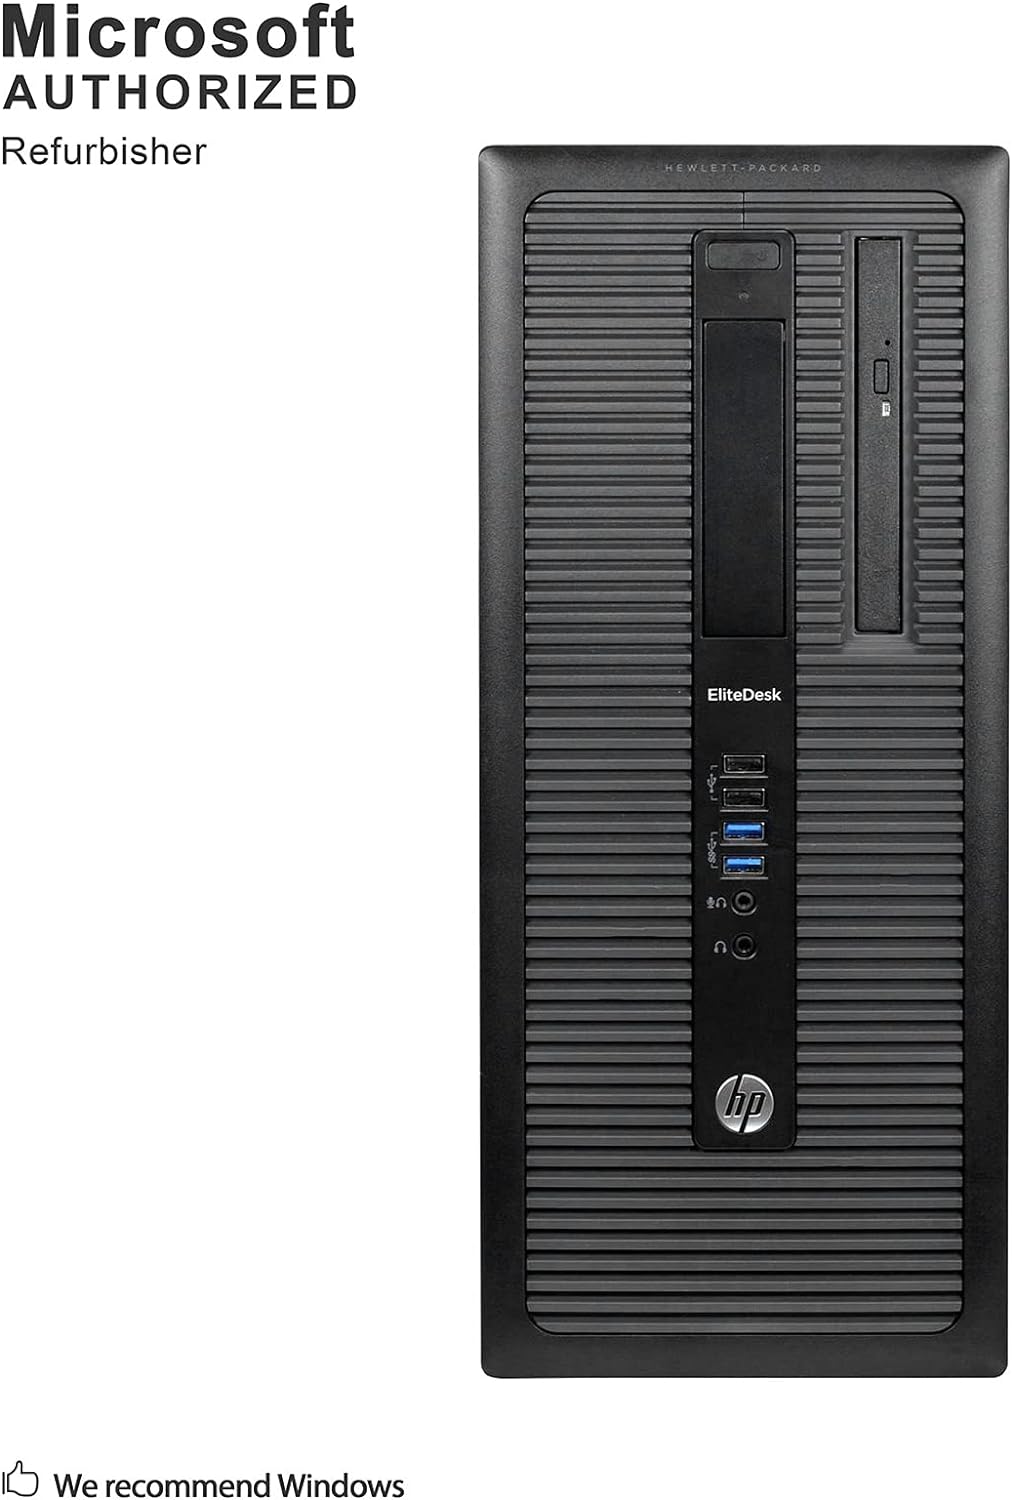 HP EliteDesk 800 G1 Small Form Business High Performance Desktop Computer PC (Intel Core i5 4570 up to 3.9GHz, 16G RAM, 120G SSD+1T HDD, DVD-ROM, WiFi, DP, Windows 10 Professional) (Renewed)